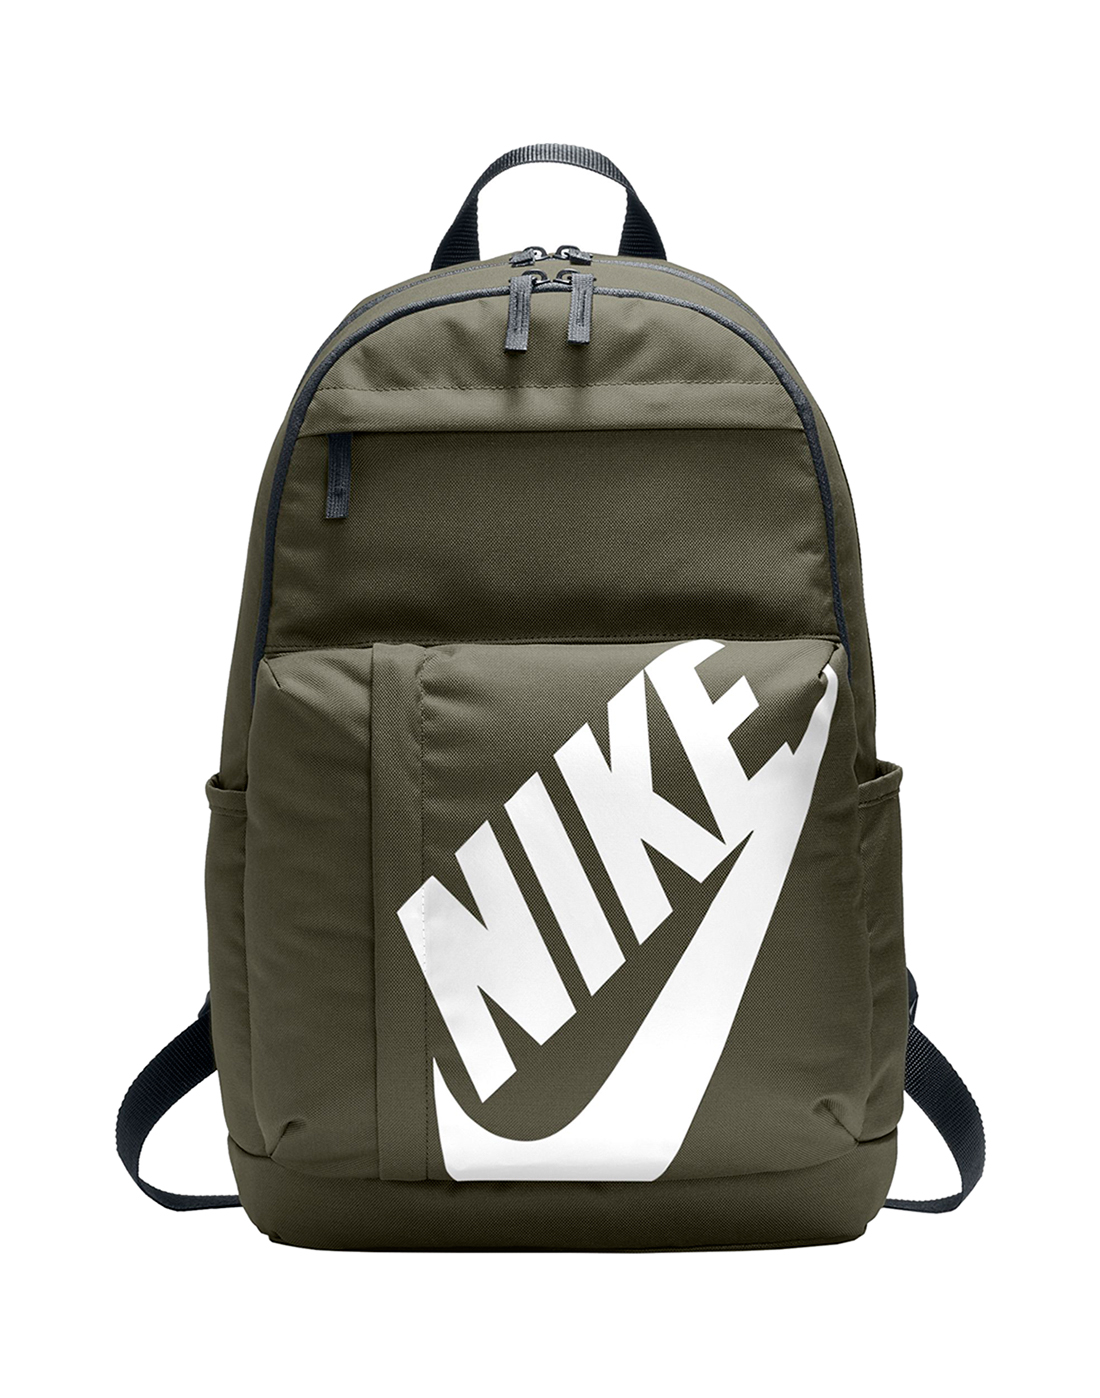 nike bags at total sports